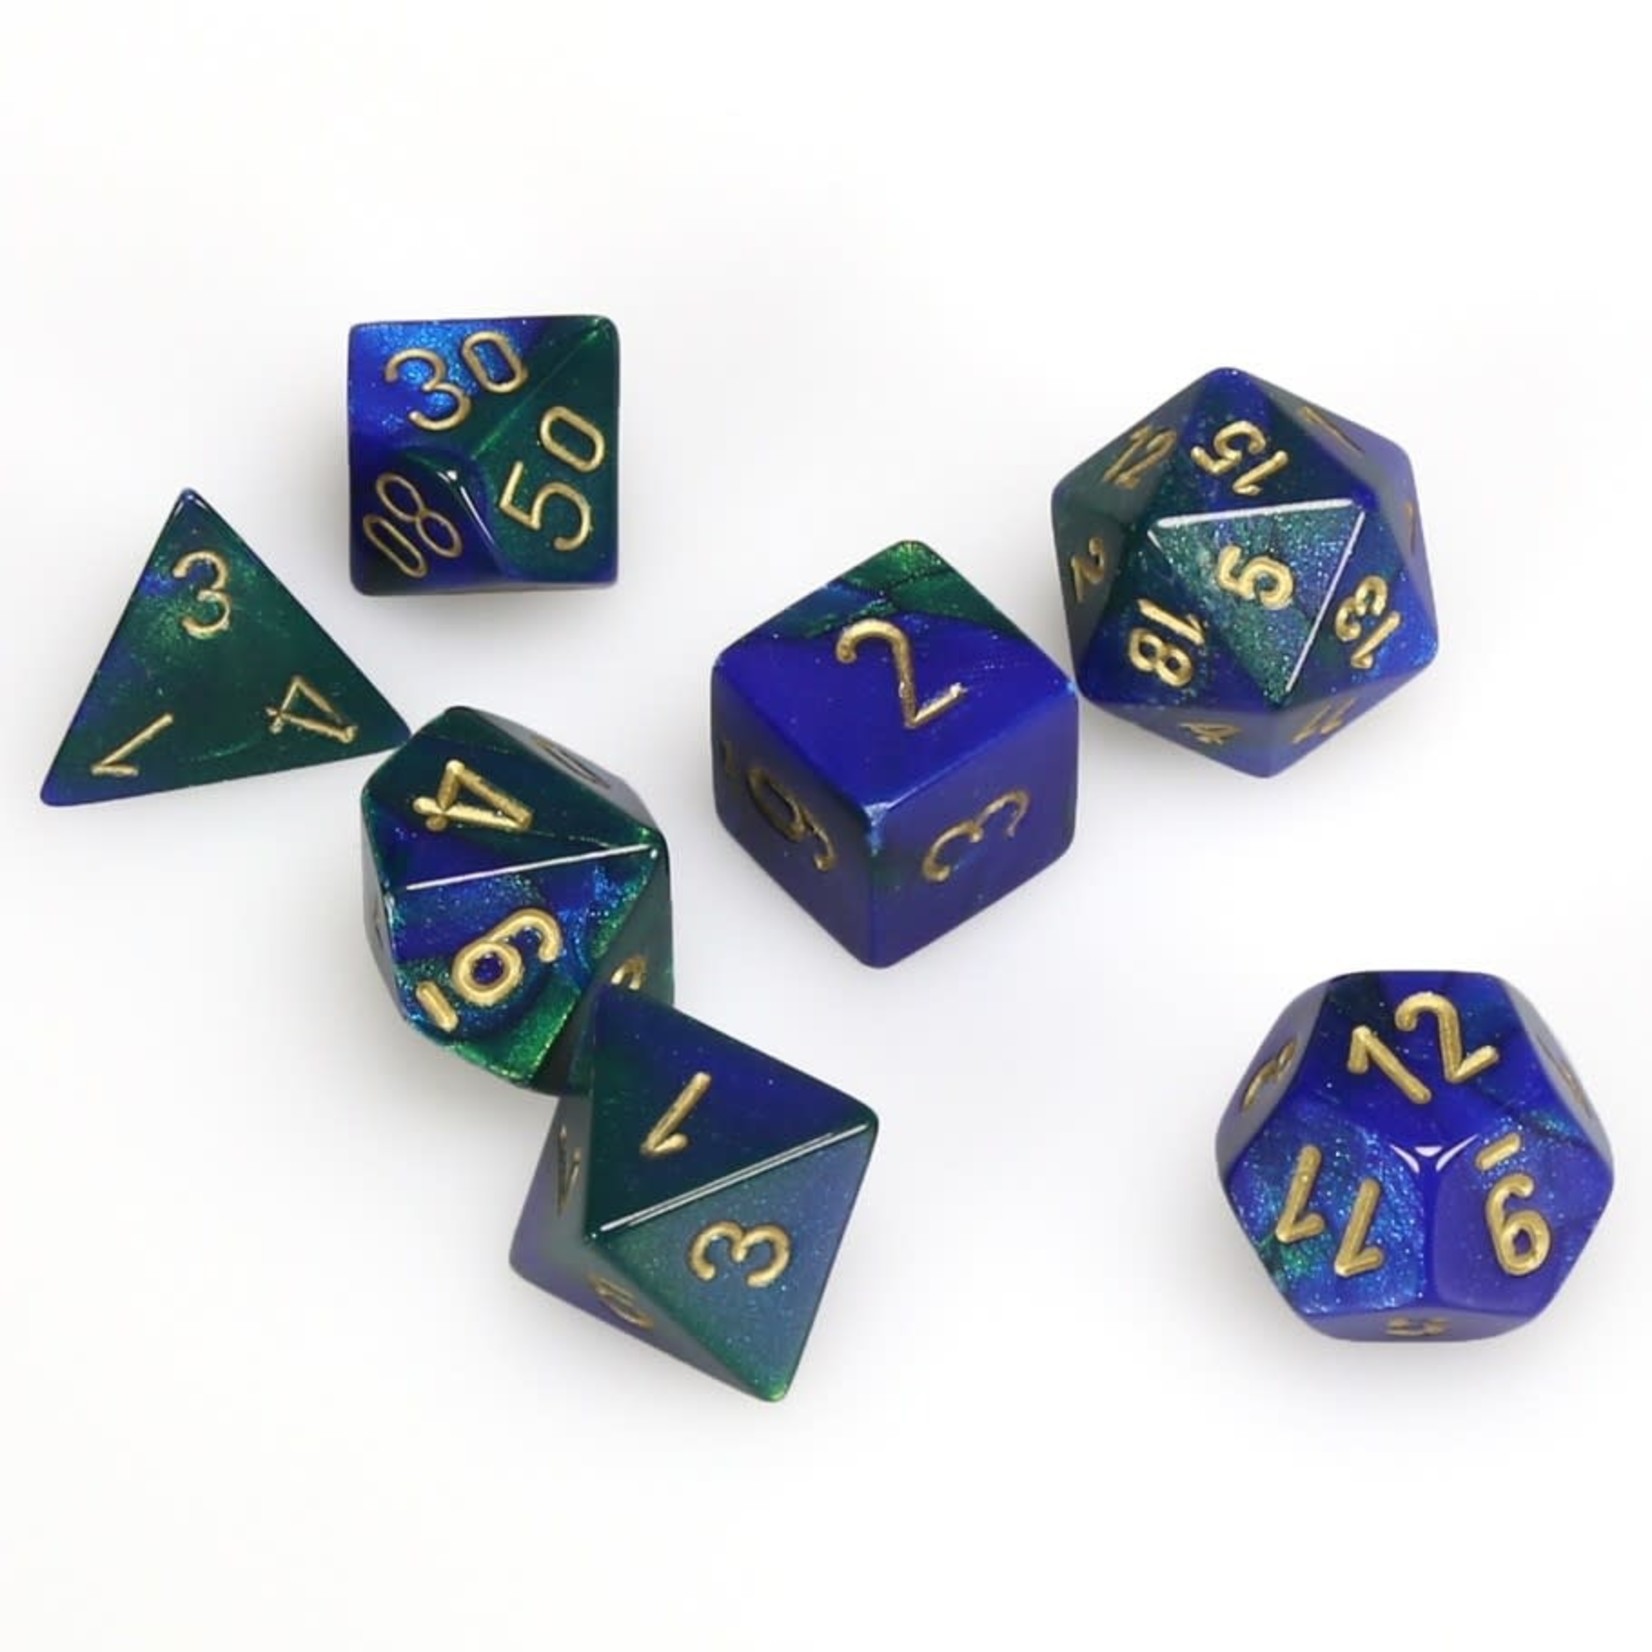 Chessex Chessex Gemini Blue / Green with Gold Polyhedral 7 die set